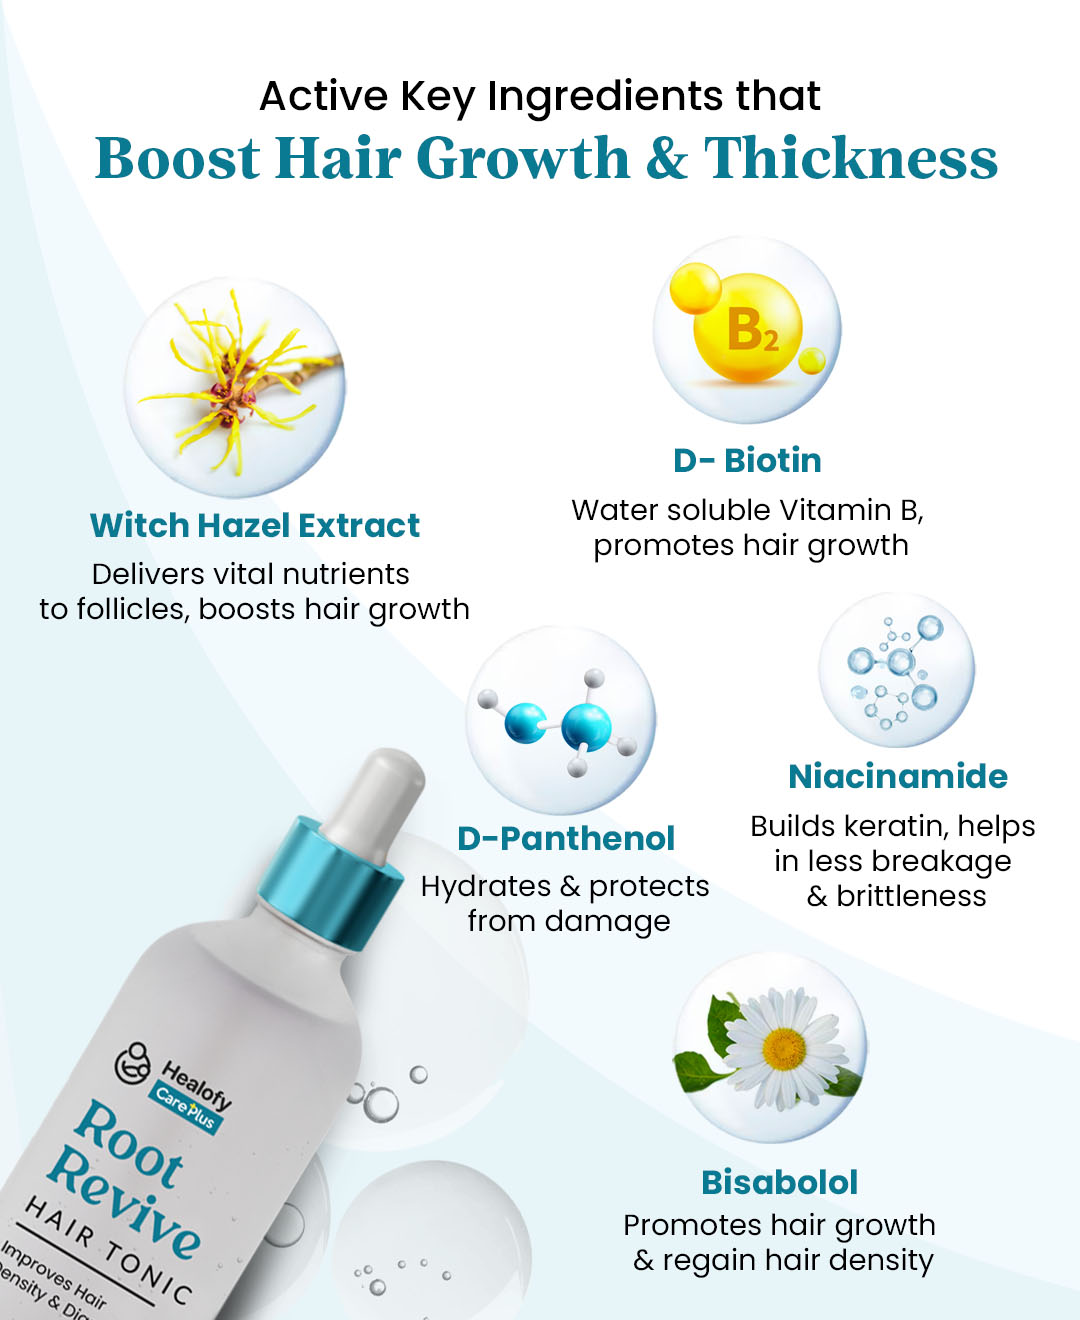 Healofy Care Plus - Root Revive Hair Tonic (To be applied on Scalp)